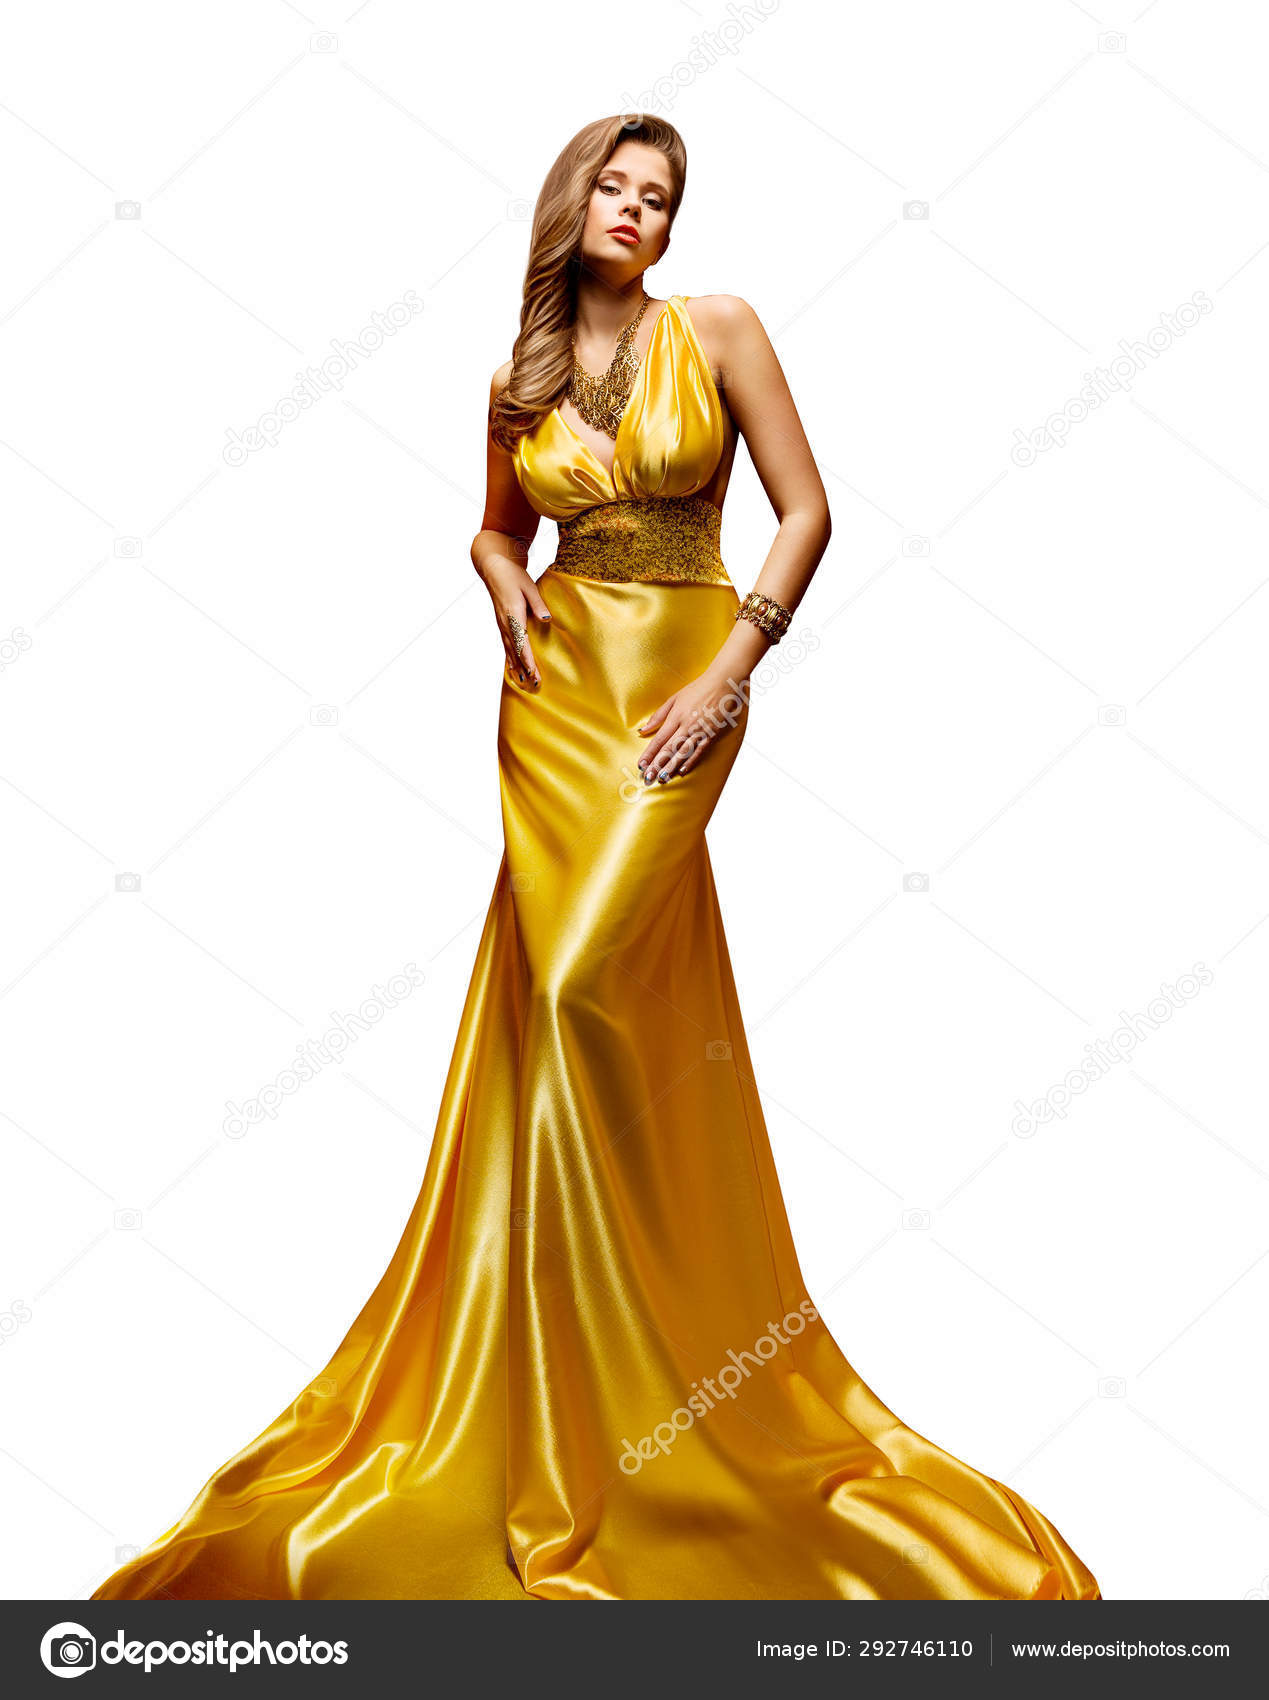 Gold Prom Dresses | Ellie Wilde | Rose Gold, Yellow Gold, White Gold & More!